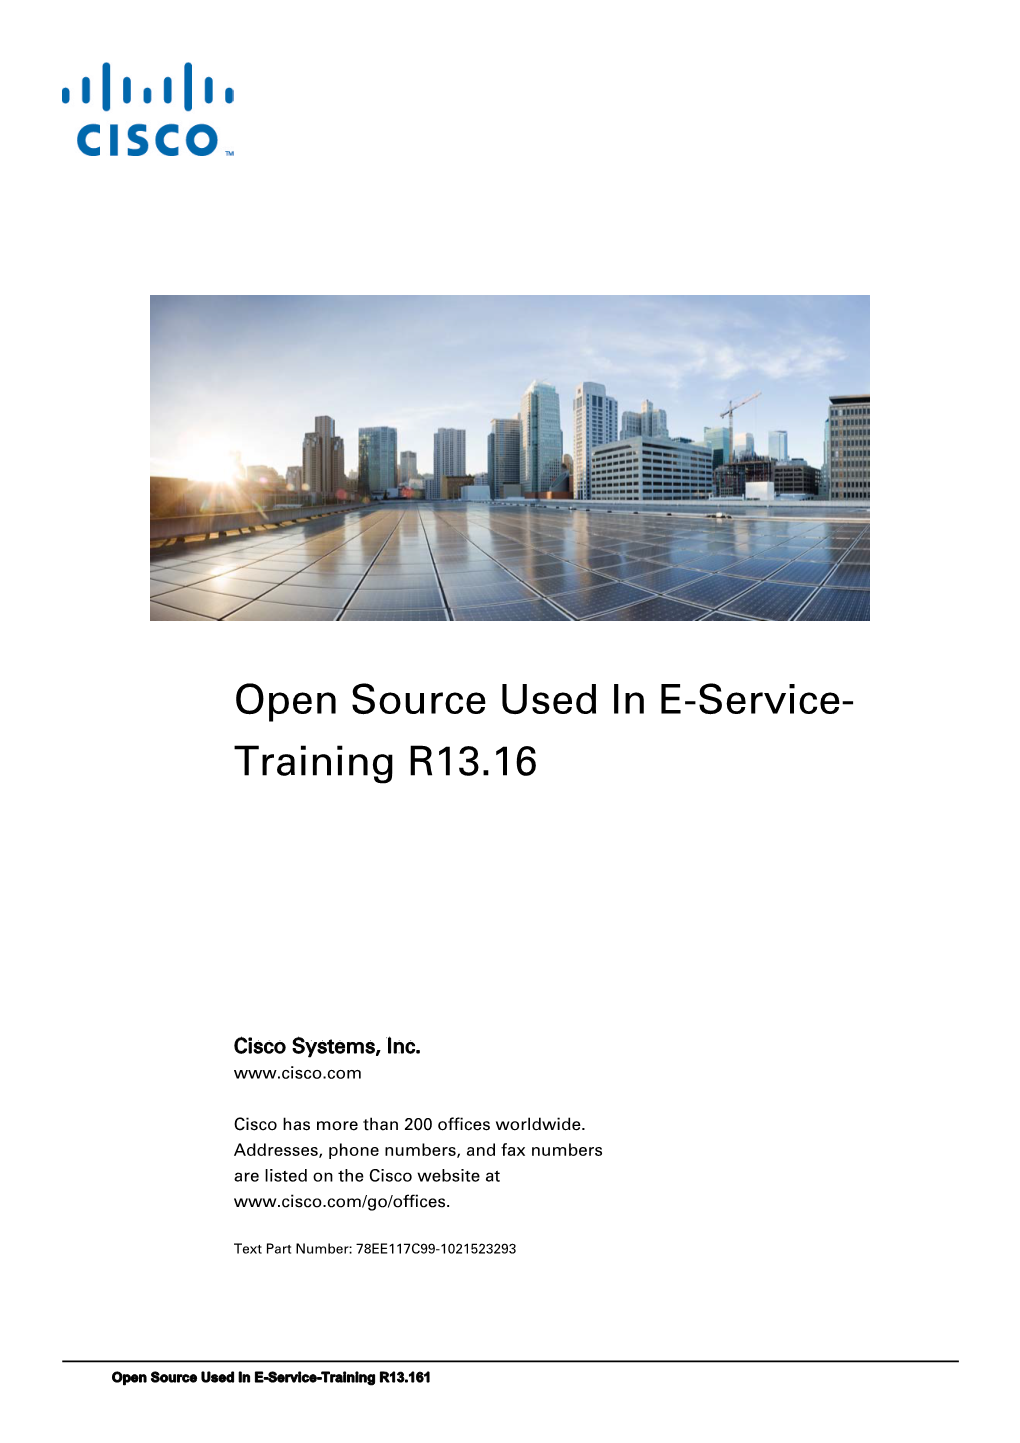 Open Source Used in E-Service-Training R13.161 This Document Contains Licenses and Notices for Open Source Software Used in This Product